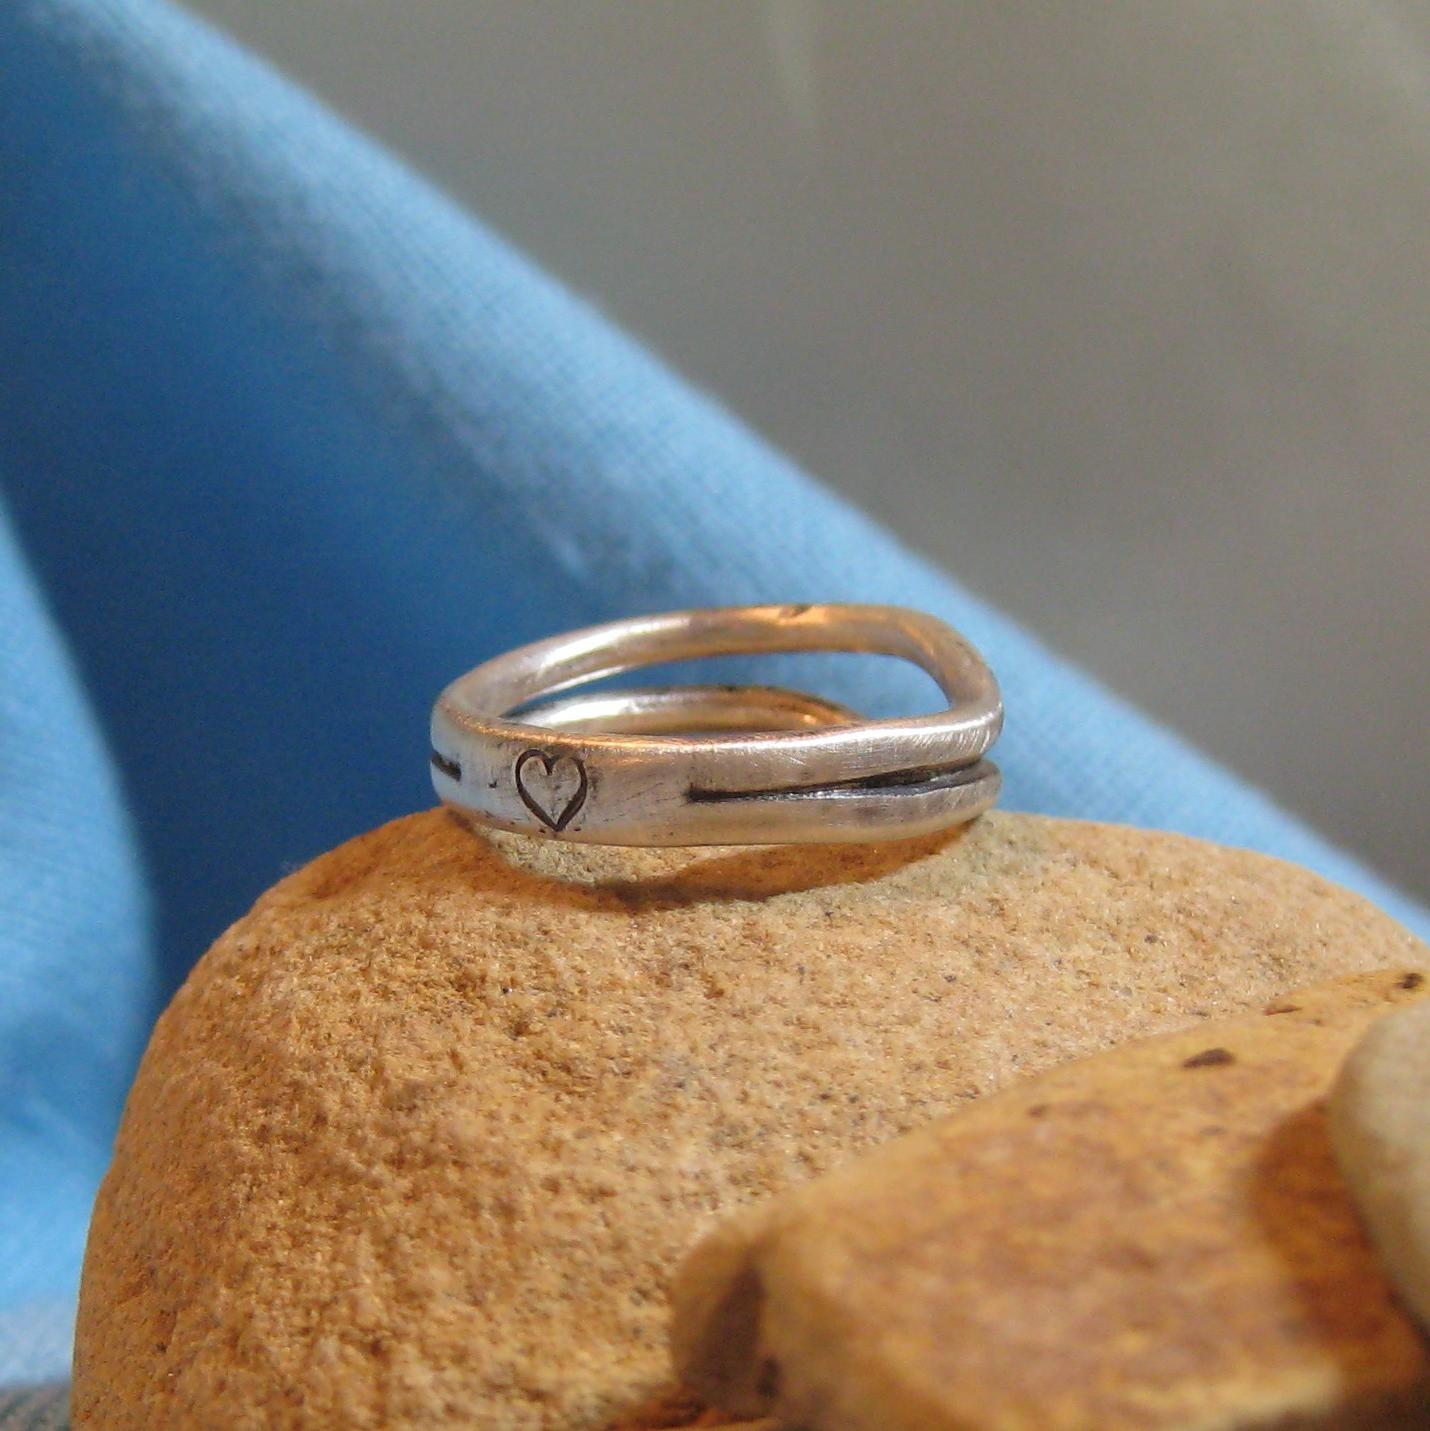 Unique Civil Union Wedding Ring - Sterling Silver Stacking Bands Bound by a